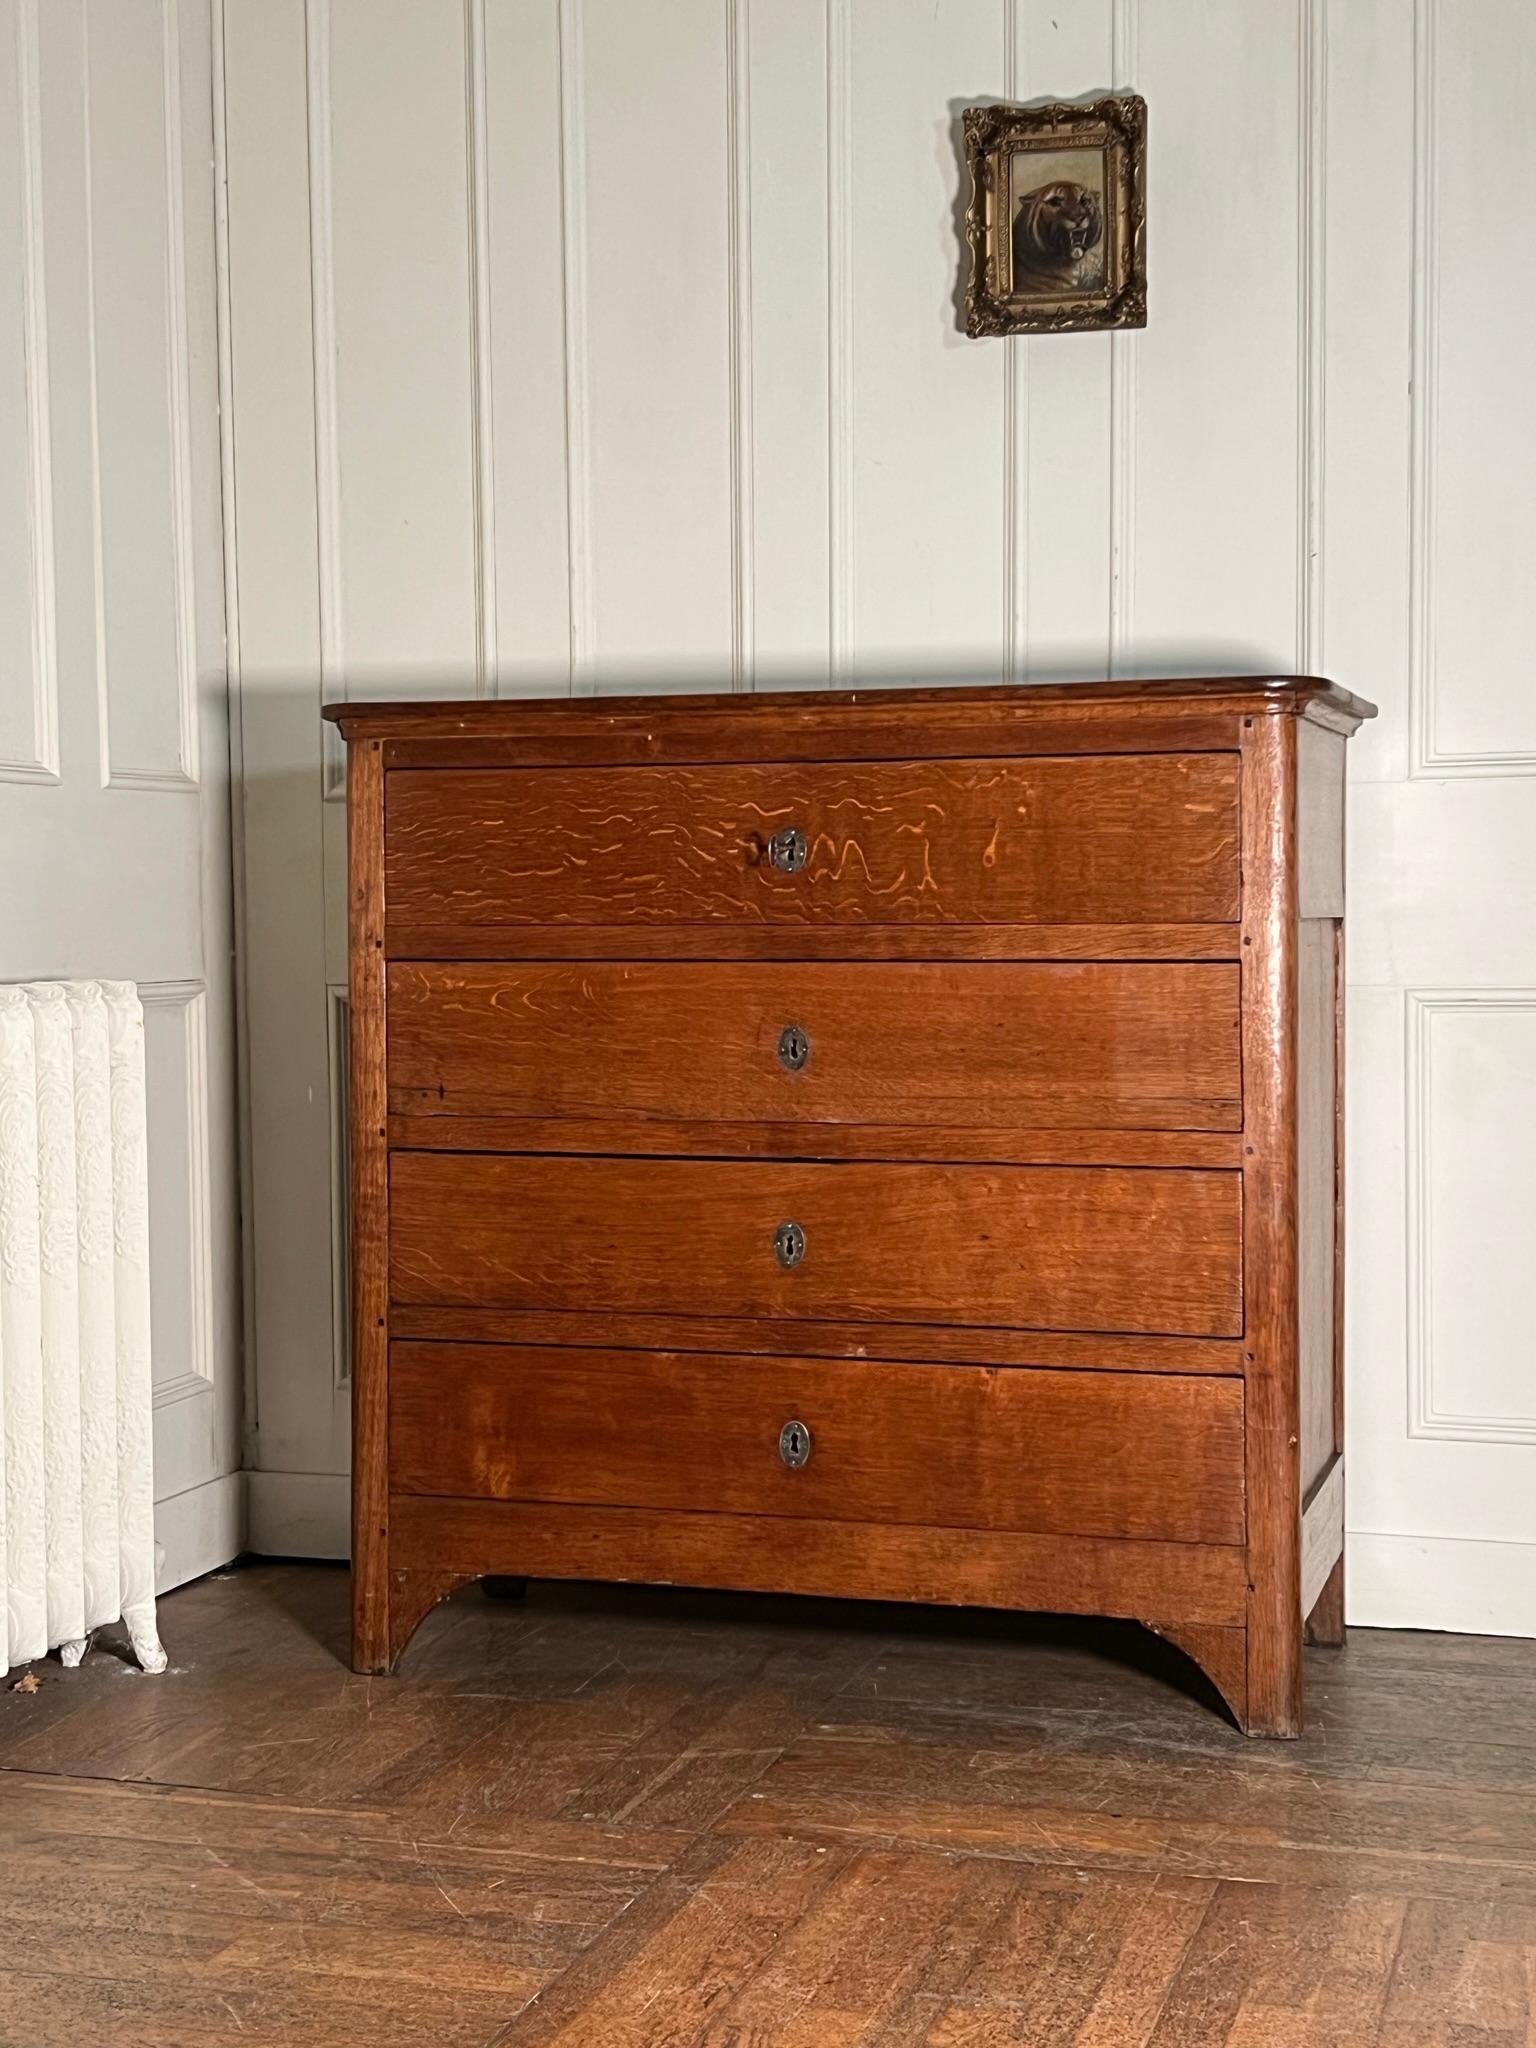 19th Century Louis Phillipe Commode In Good Condition For Sale In Warrington, GB